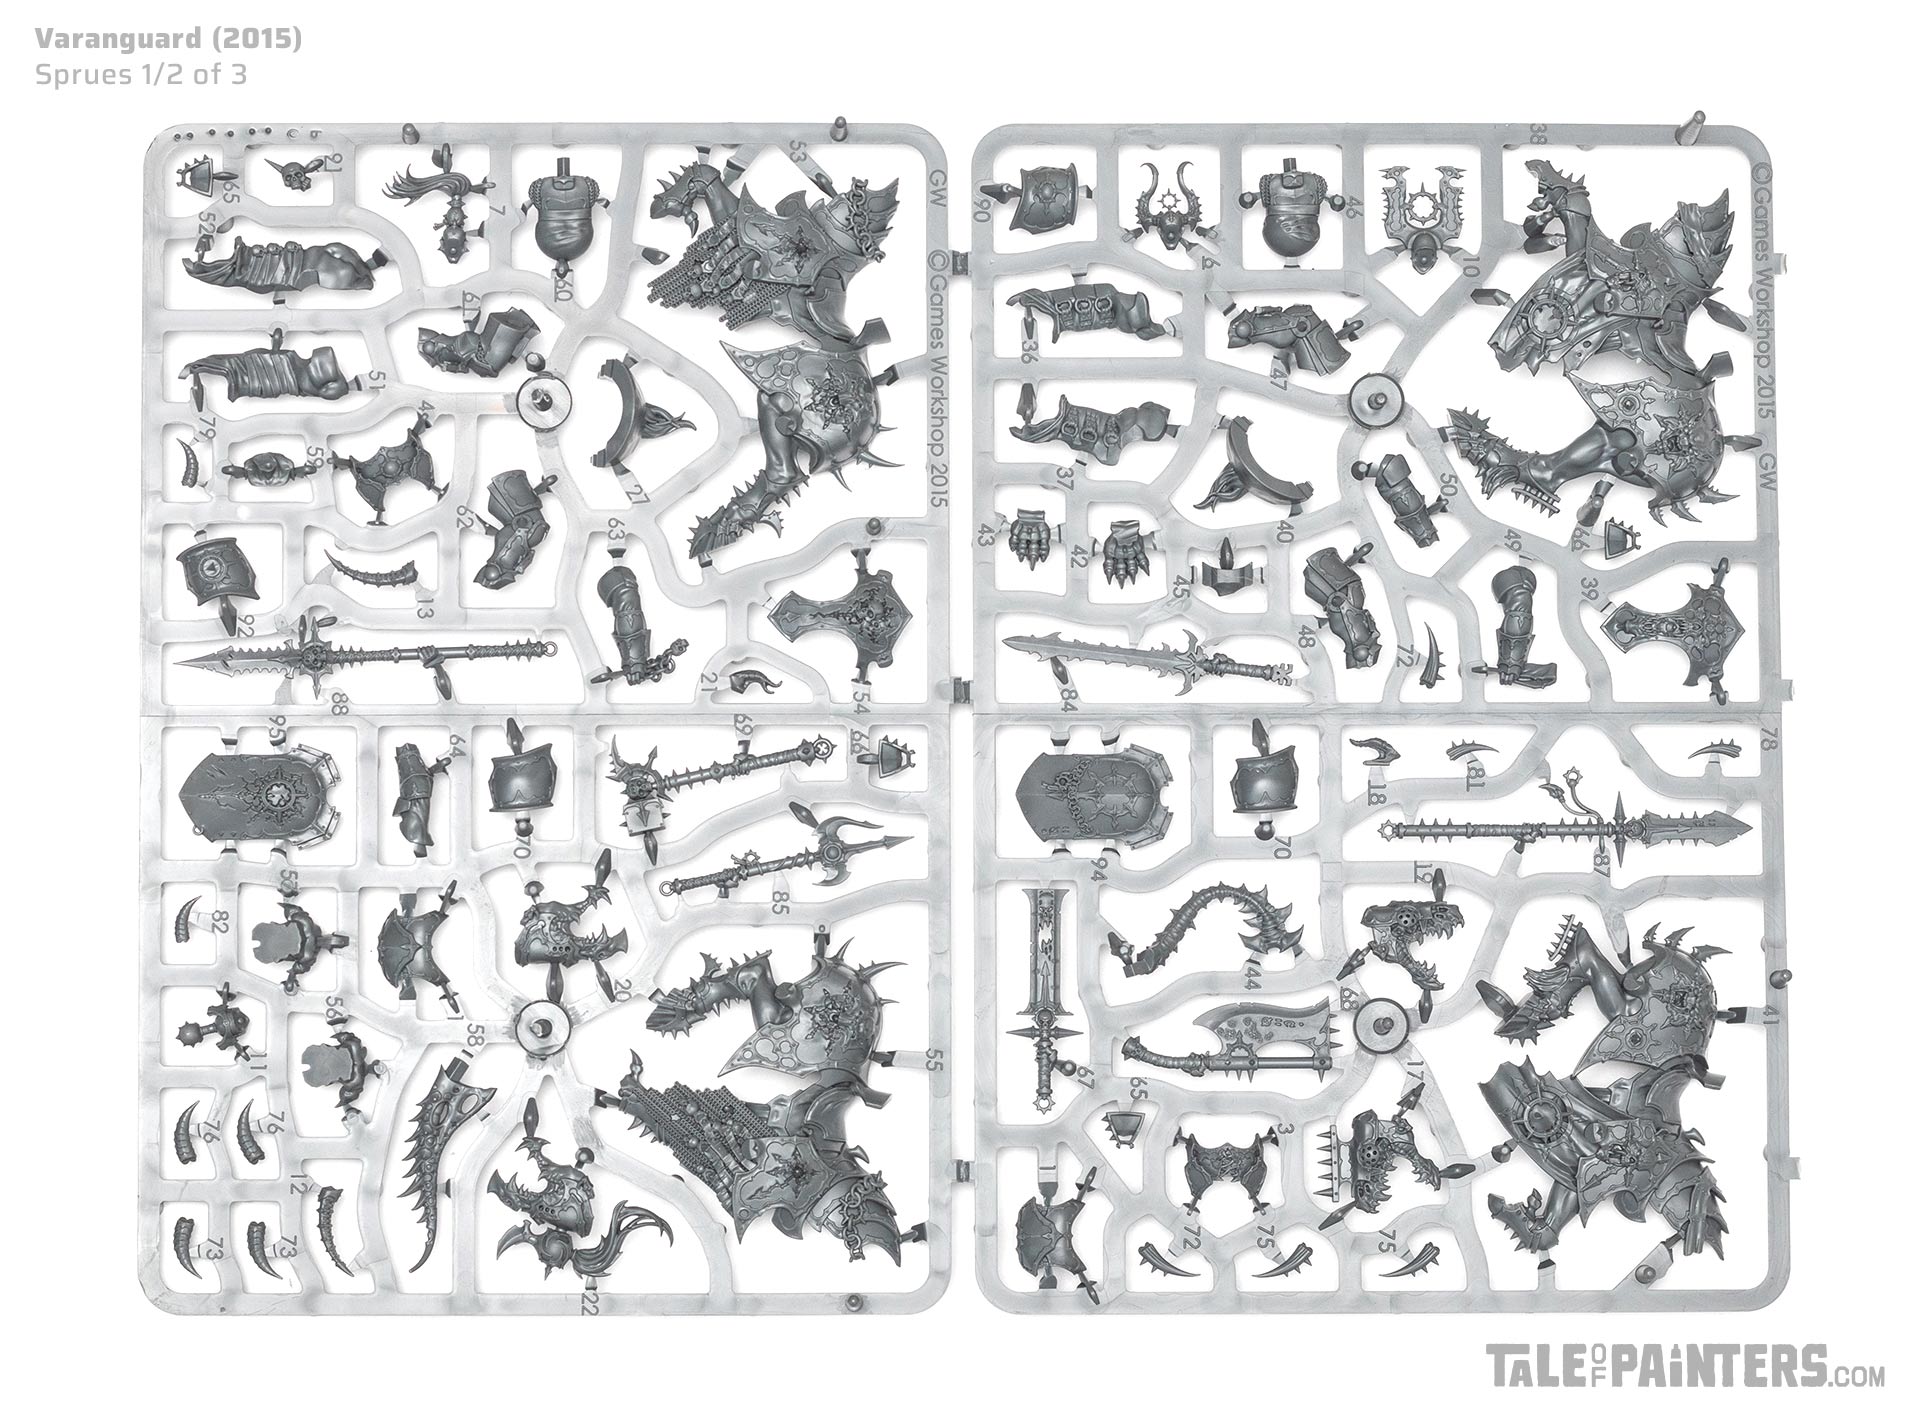 Slaves to Darkness Varanguard sprues 1 and 2 of 3